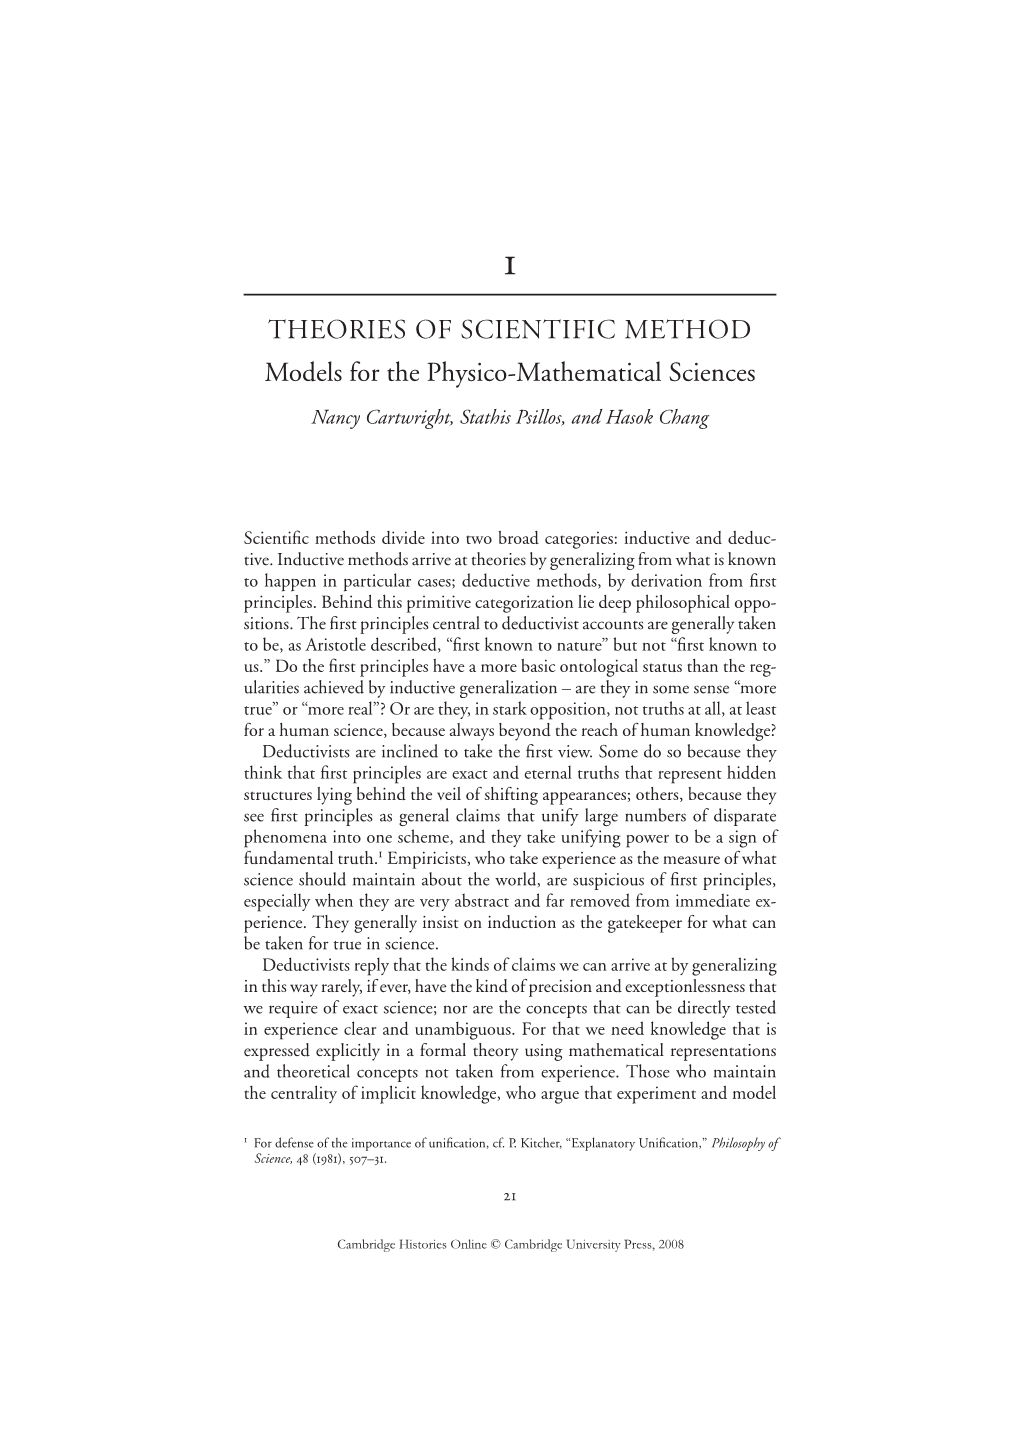 Theories of Scientific Method Models for the Physico-Mathematical